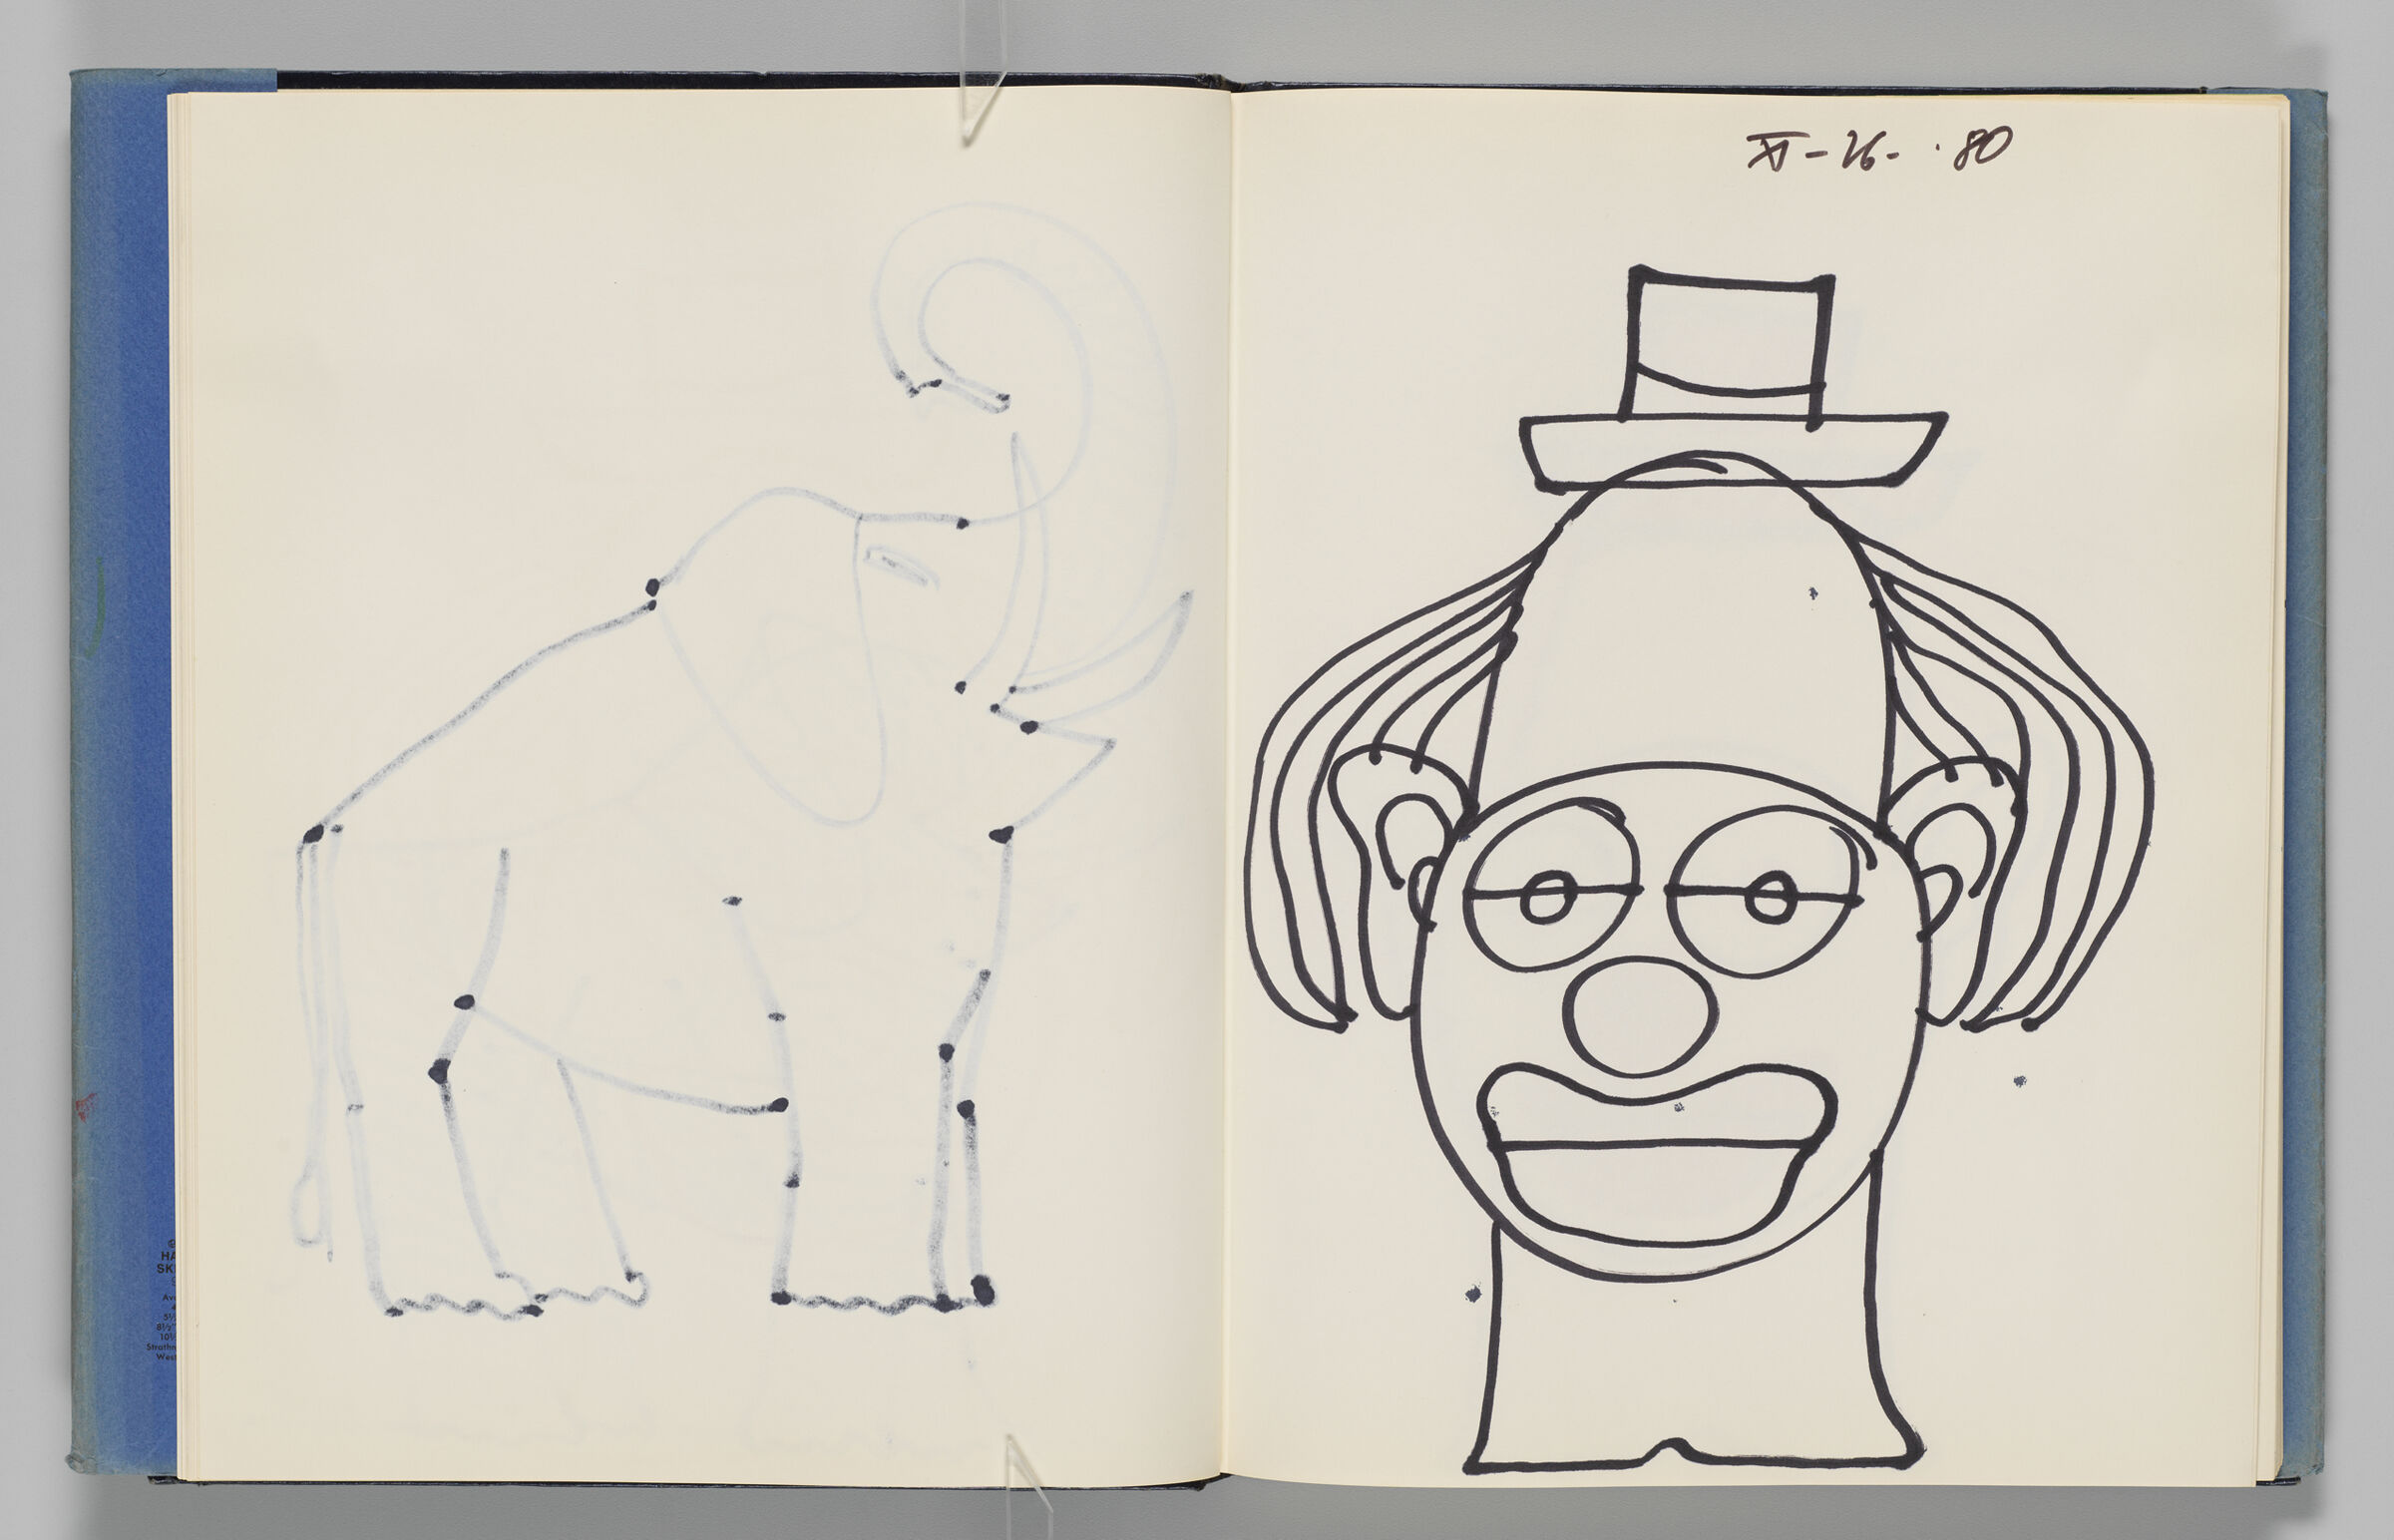 Untitled (Bleed-Through Of Previous Page, Left Page); Untitled (Clown, Right Page)